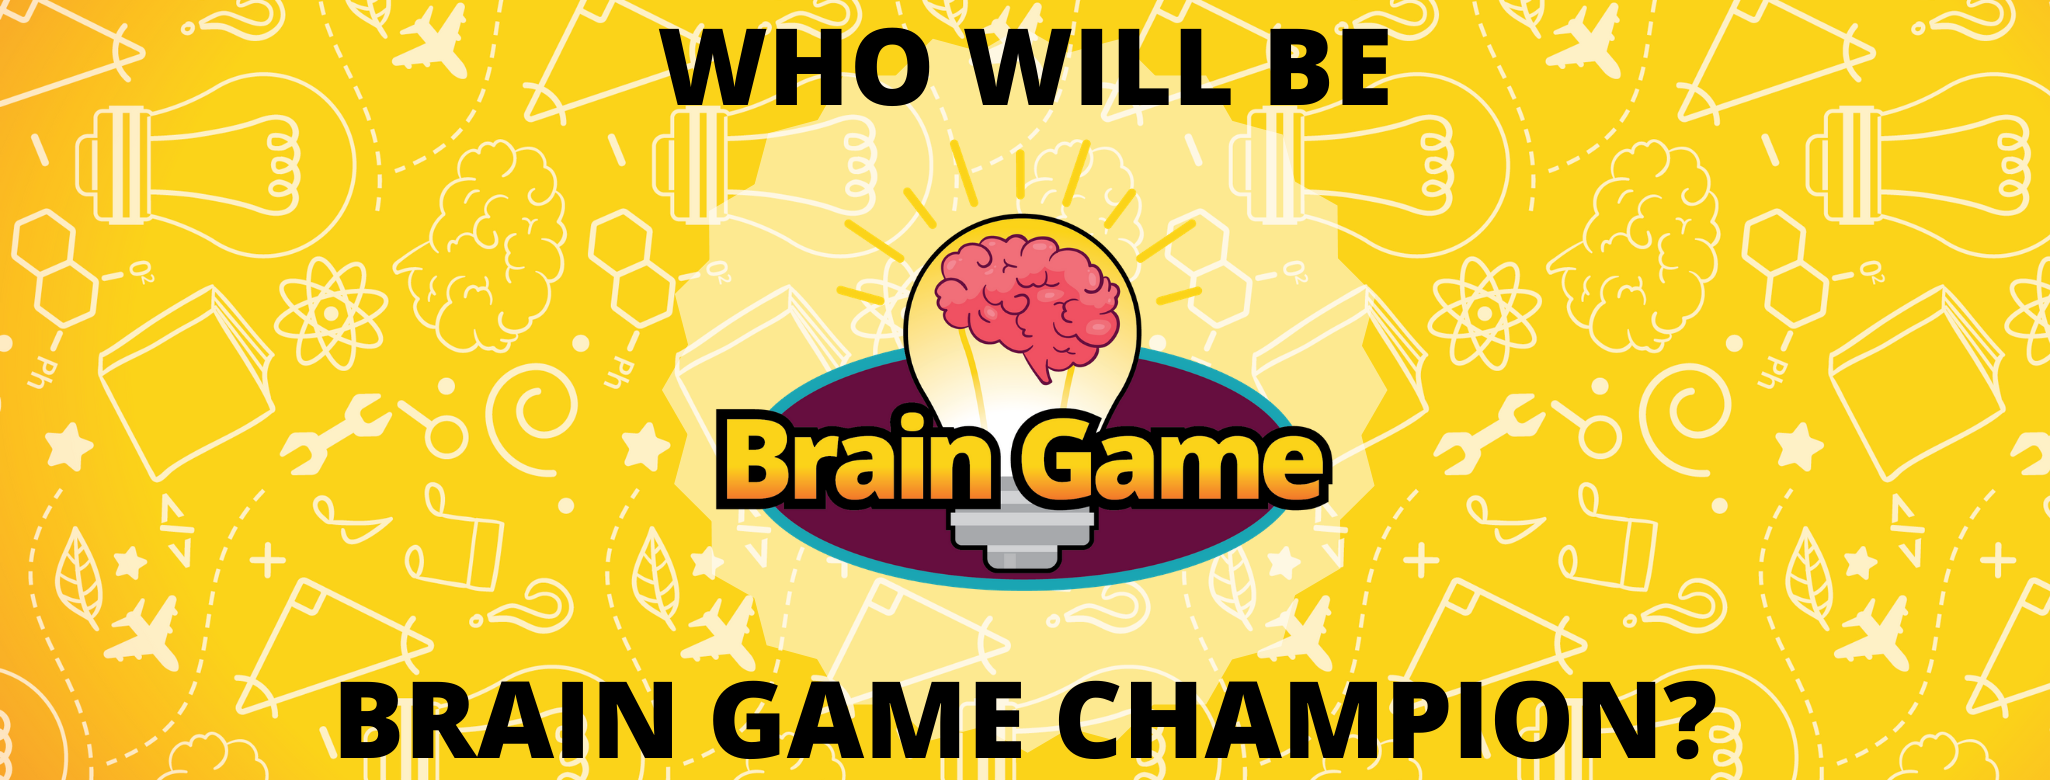 WHO WILL BE BRAIN GAME CHAMPION 2020_